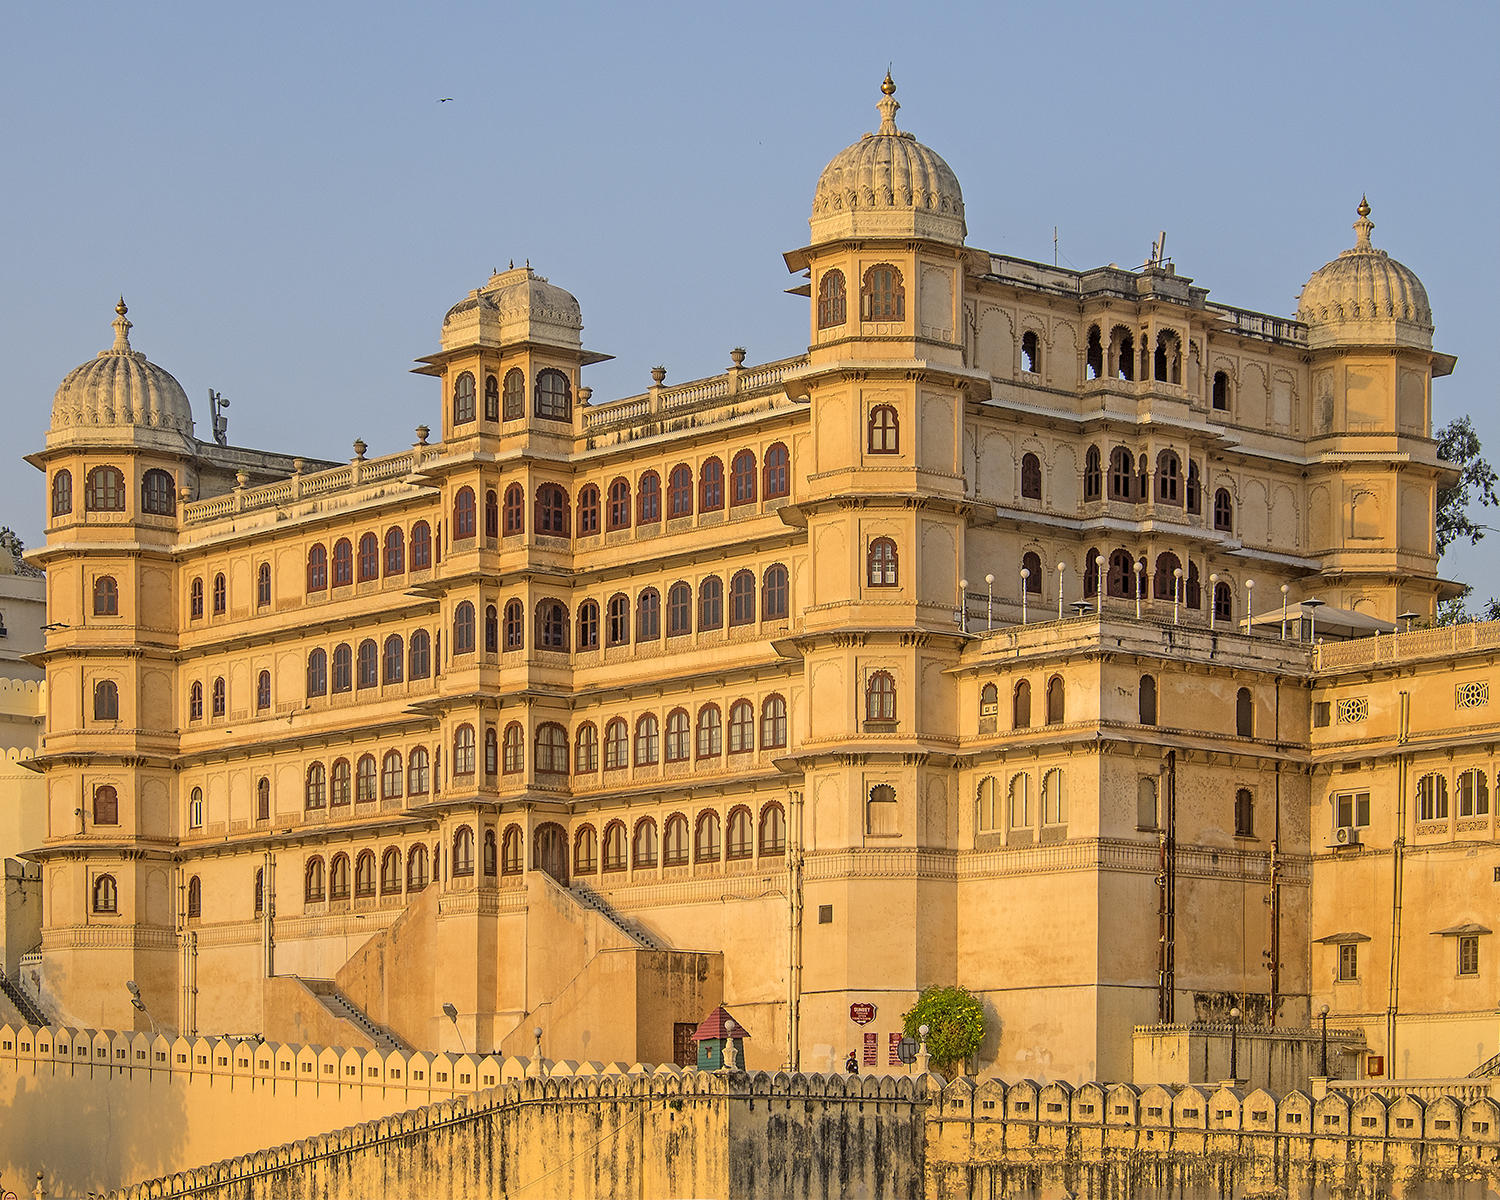 Royal Palace, Udaipur, India<p><a class="nav-link" href="/content.html?page=6/#TA56" target="_top">Thumbnail</a>